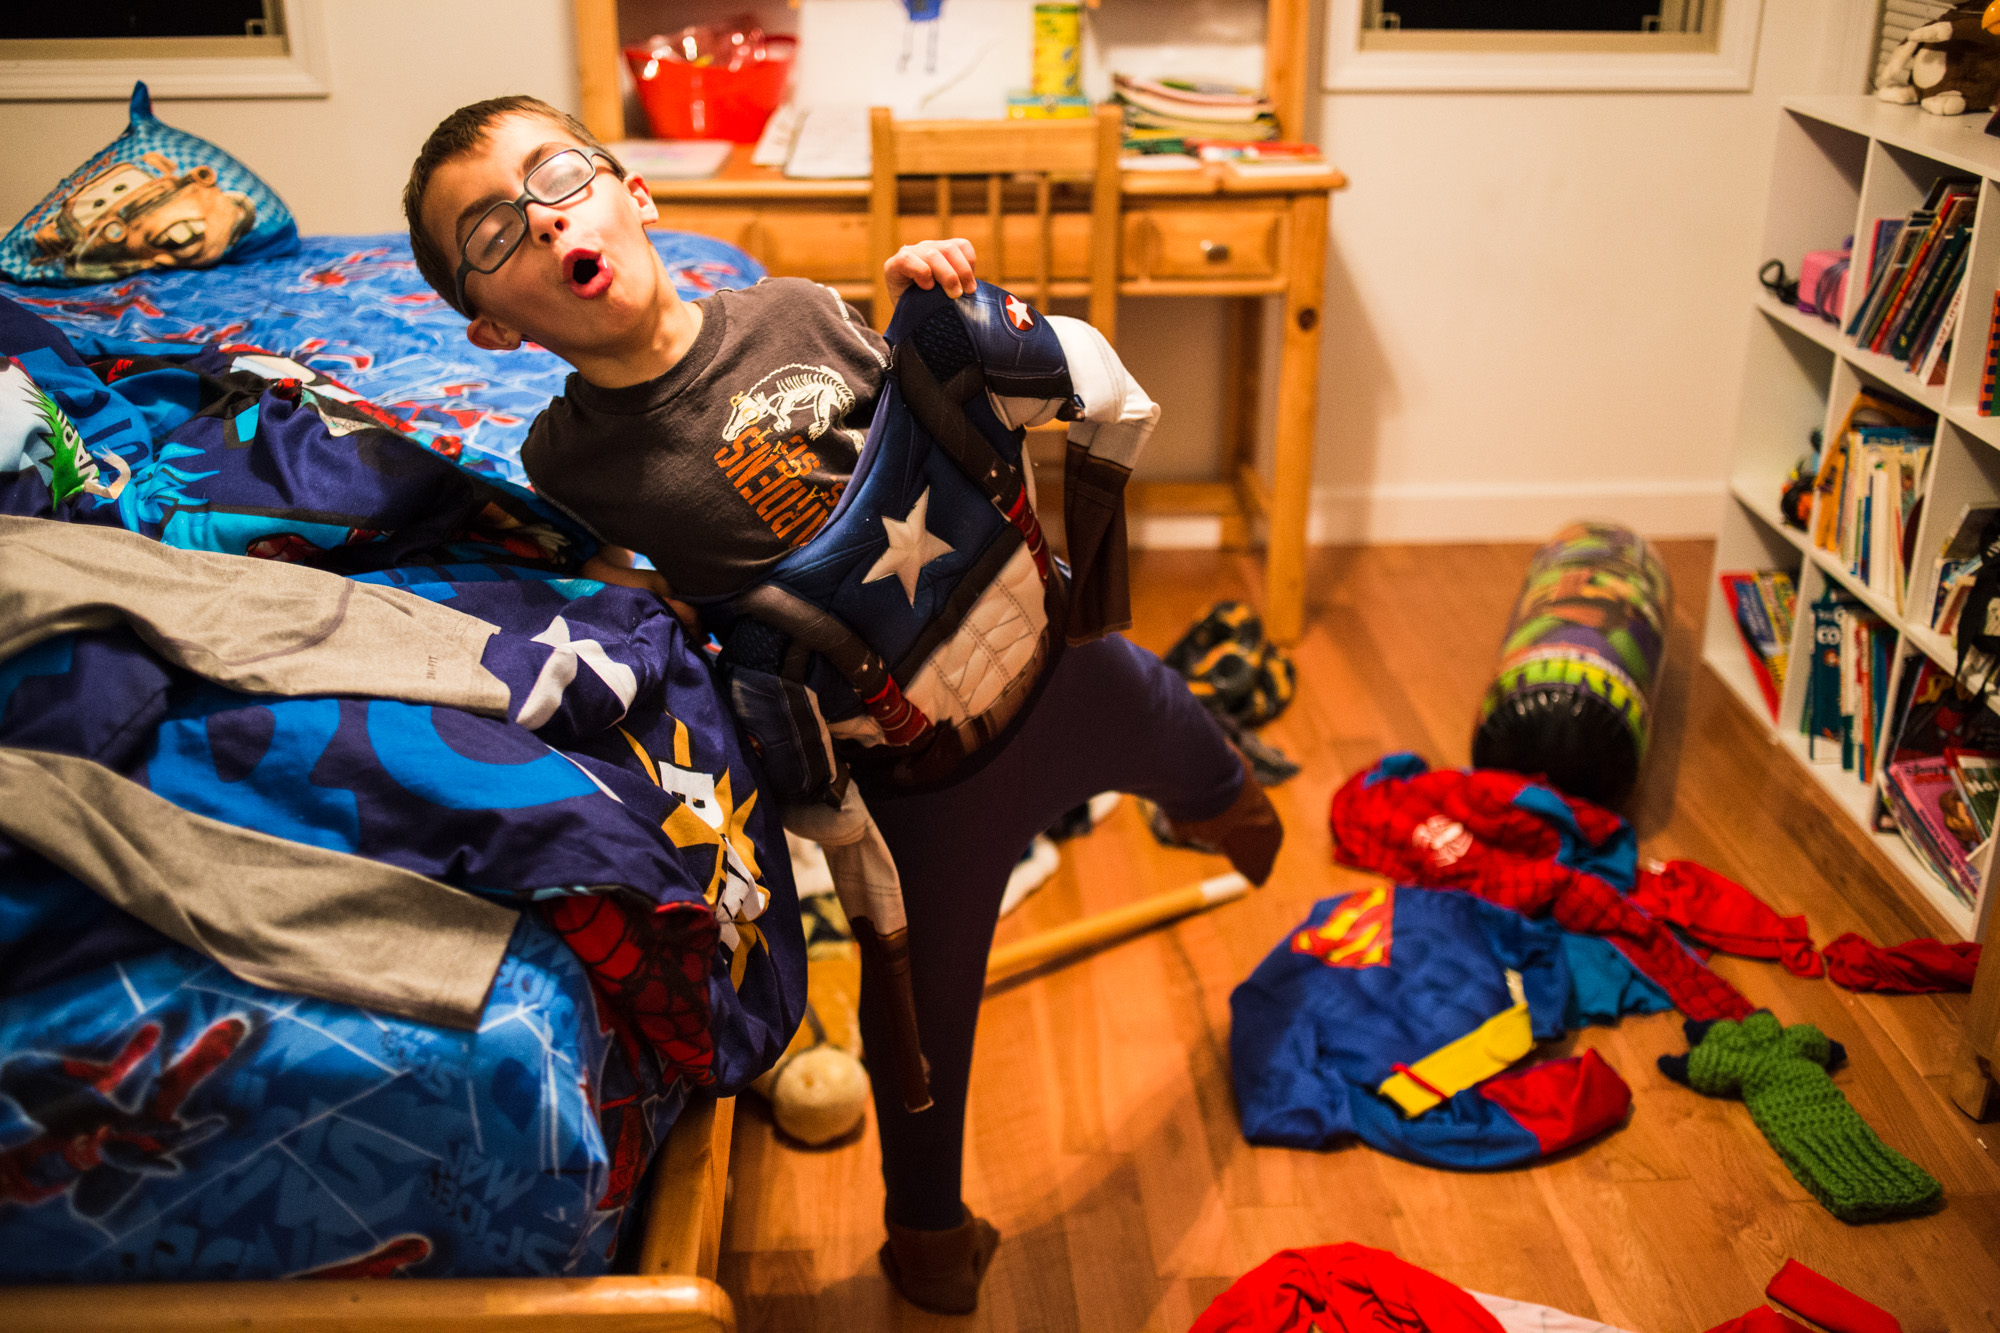  Treven tries on one of his many superhero costumes in his bedroom. Like other kids his age, he loves cartoons and superhero movies. 